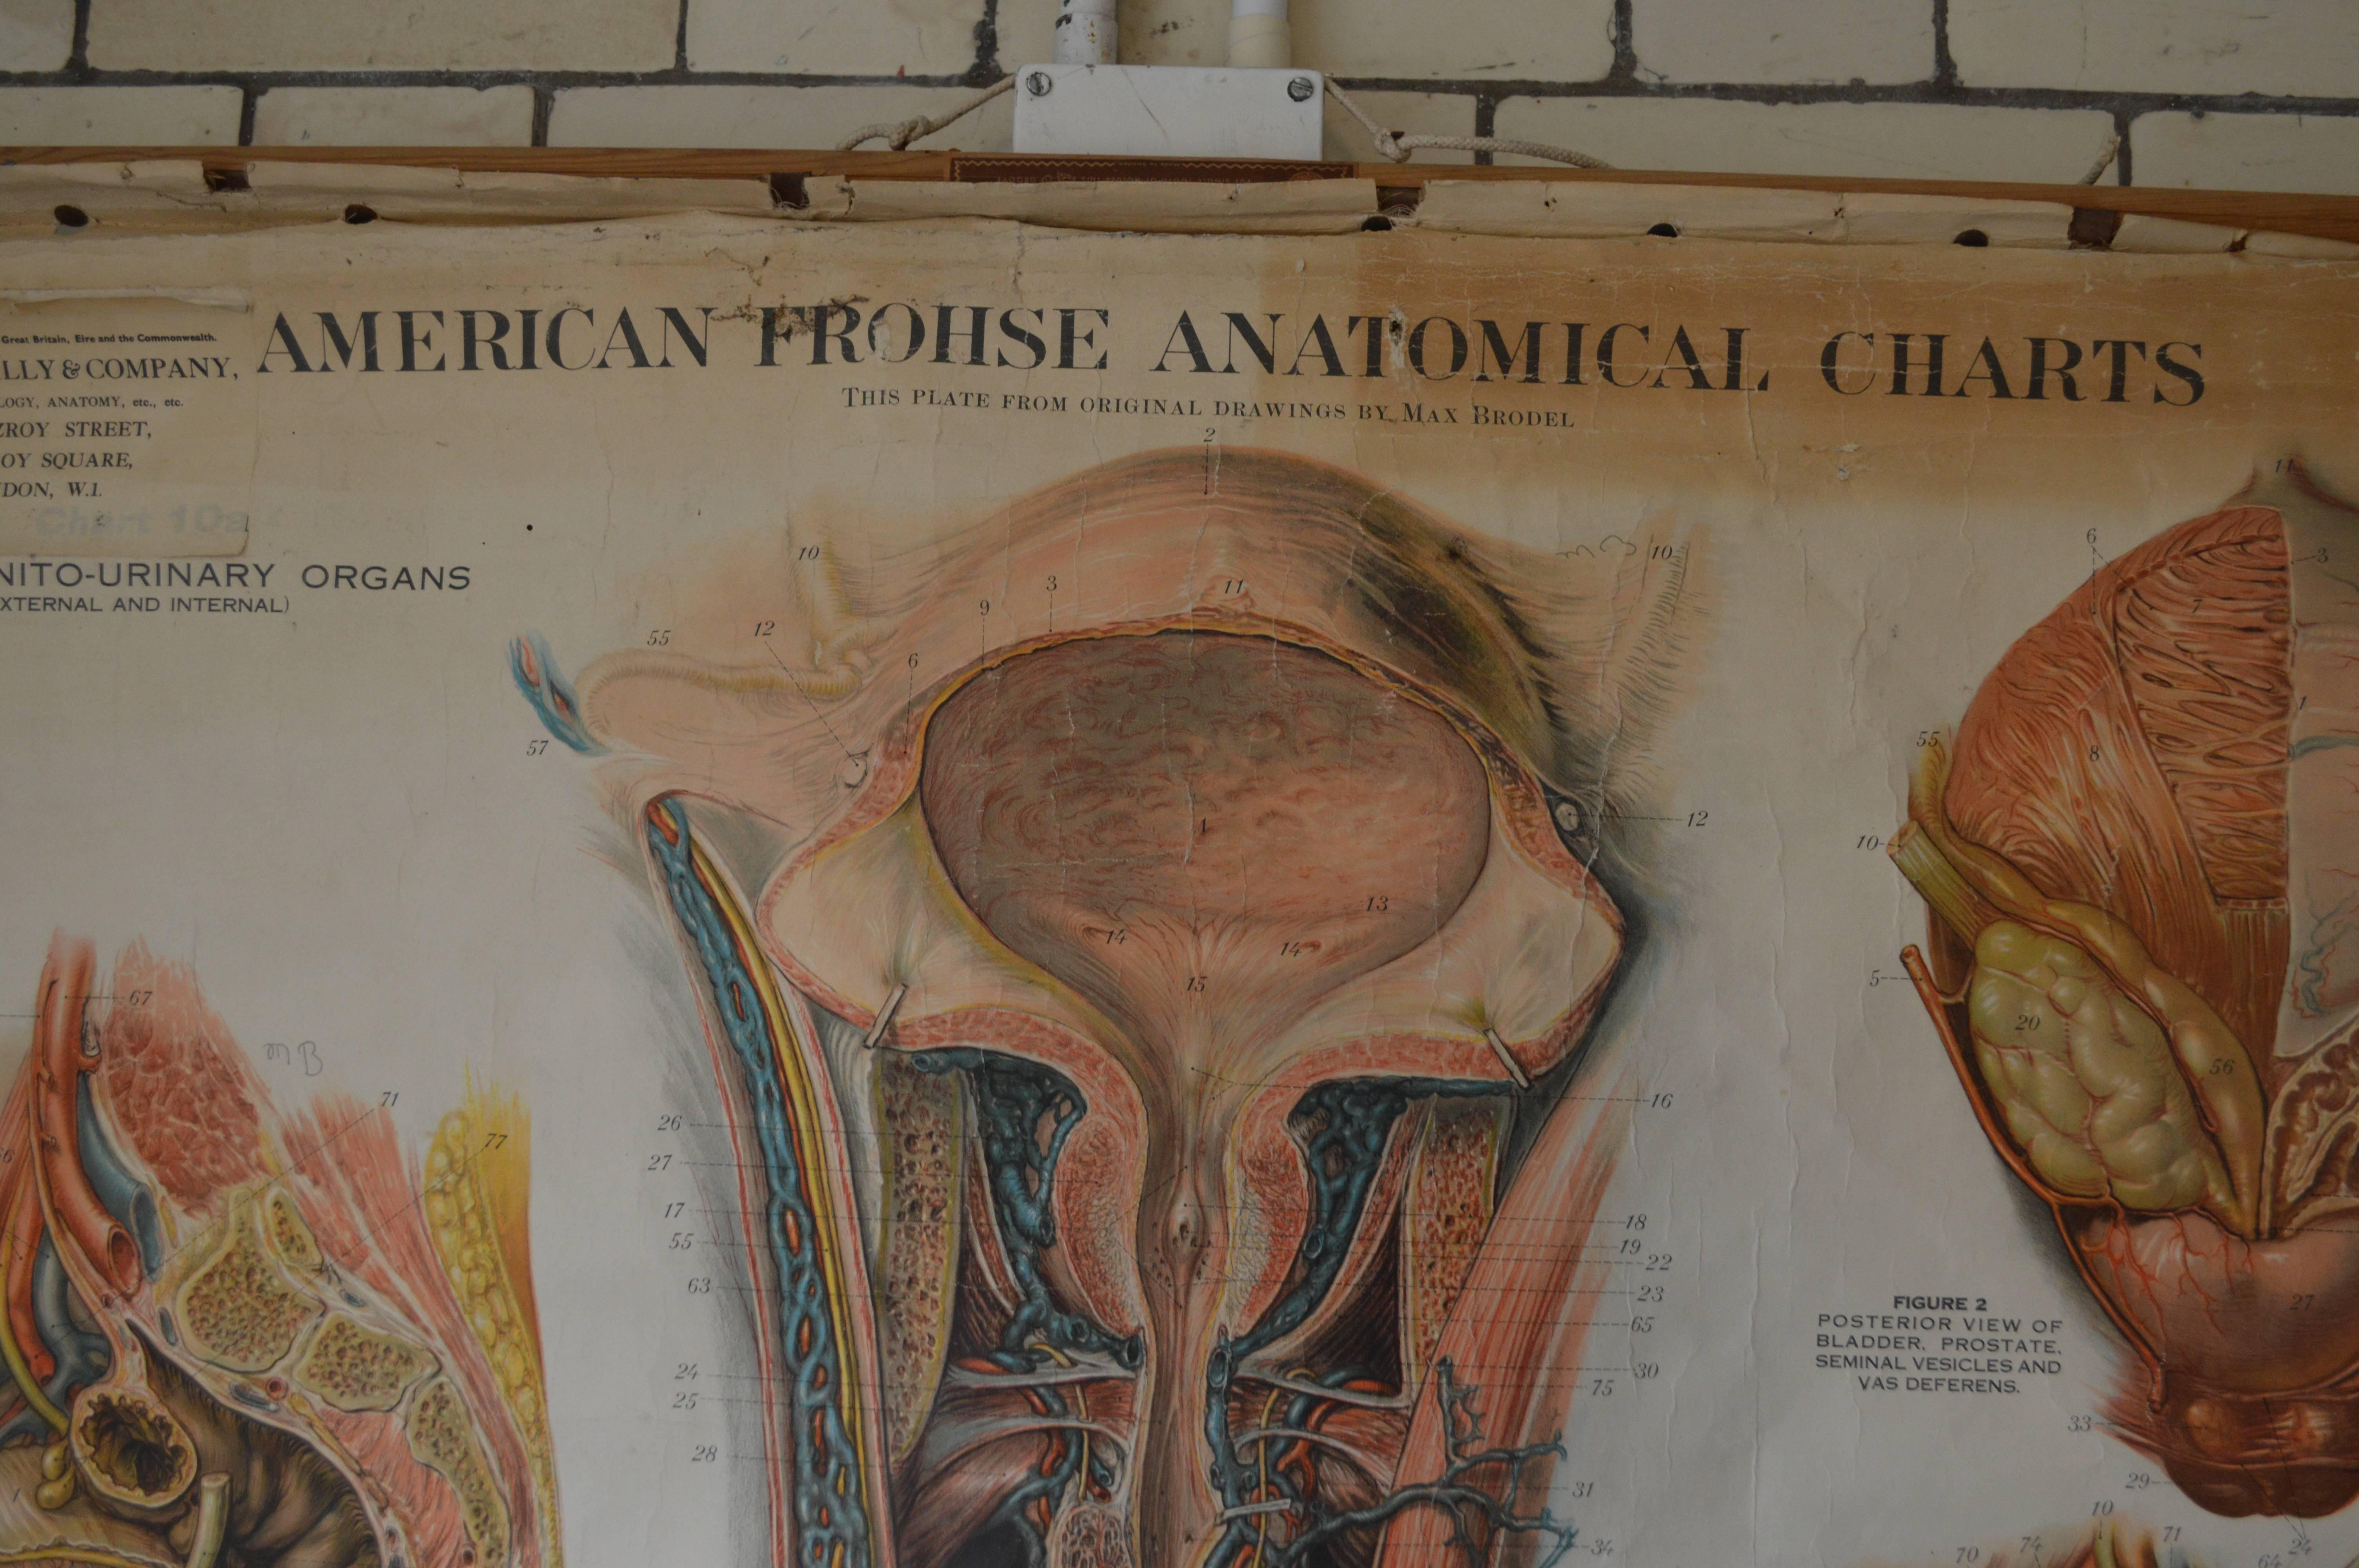 This is a highly collectible Max Brödel, American Frohse anatomical wall chart illustrating the male and female Genito-Urinary functions. The chart also has a wonderful sticker indicating that the chart was distributed in the early to mid-part of